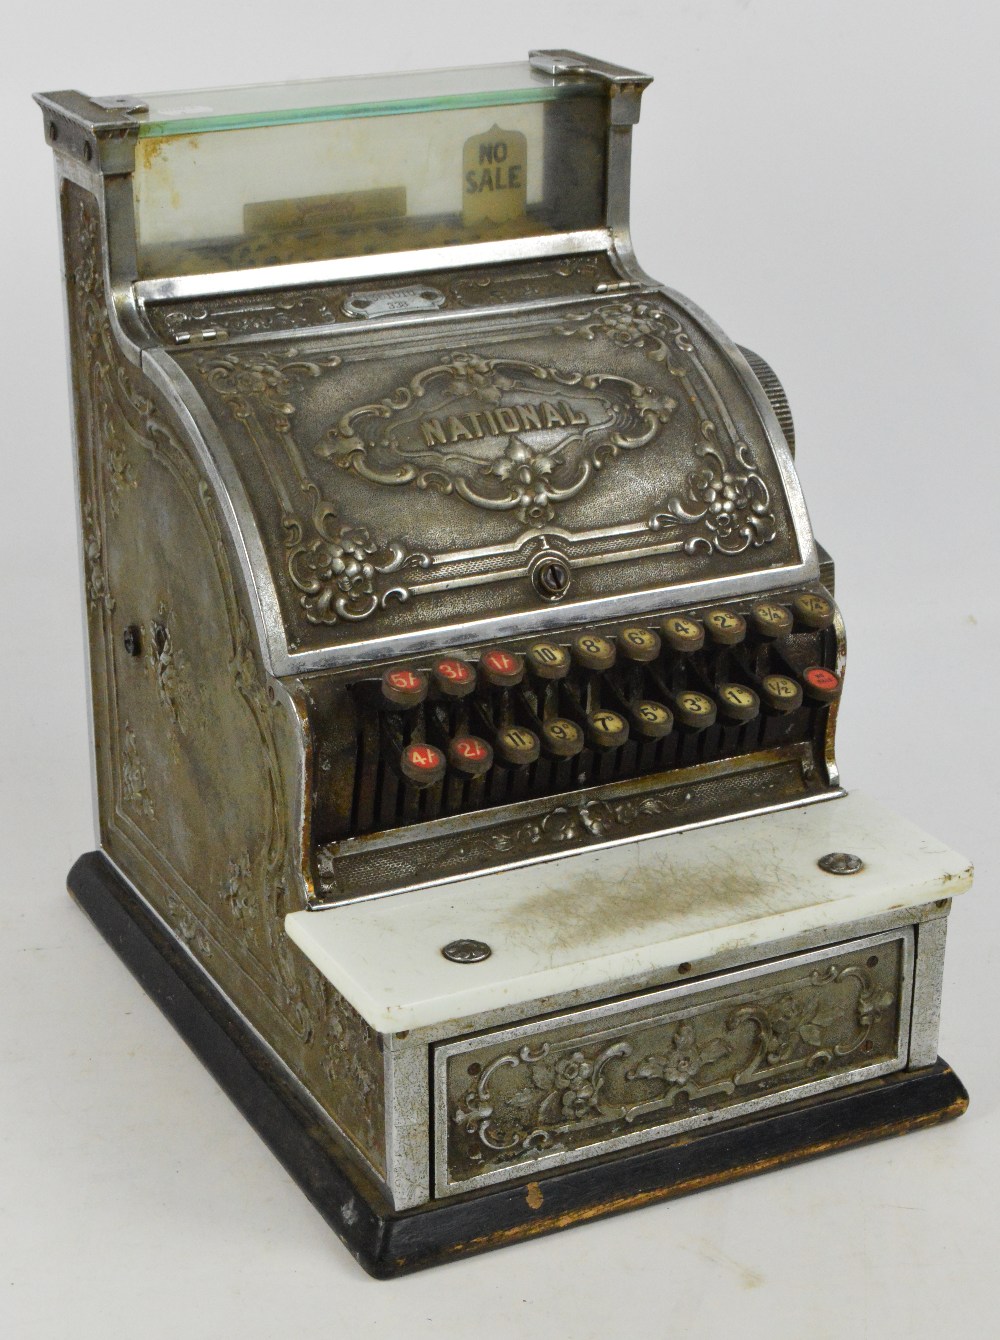 An early 20th century National Cash Register with glazed viewing section, floral embossed main panel